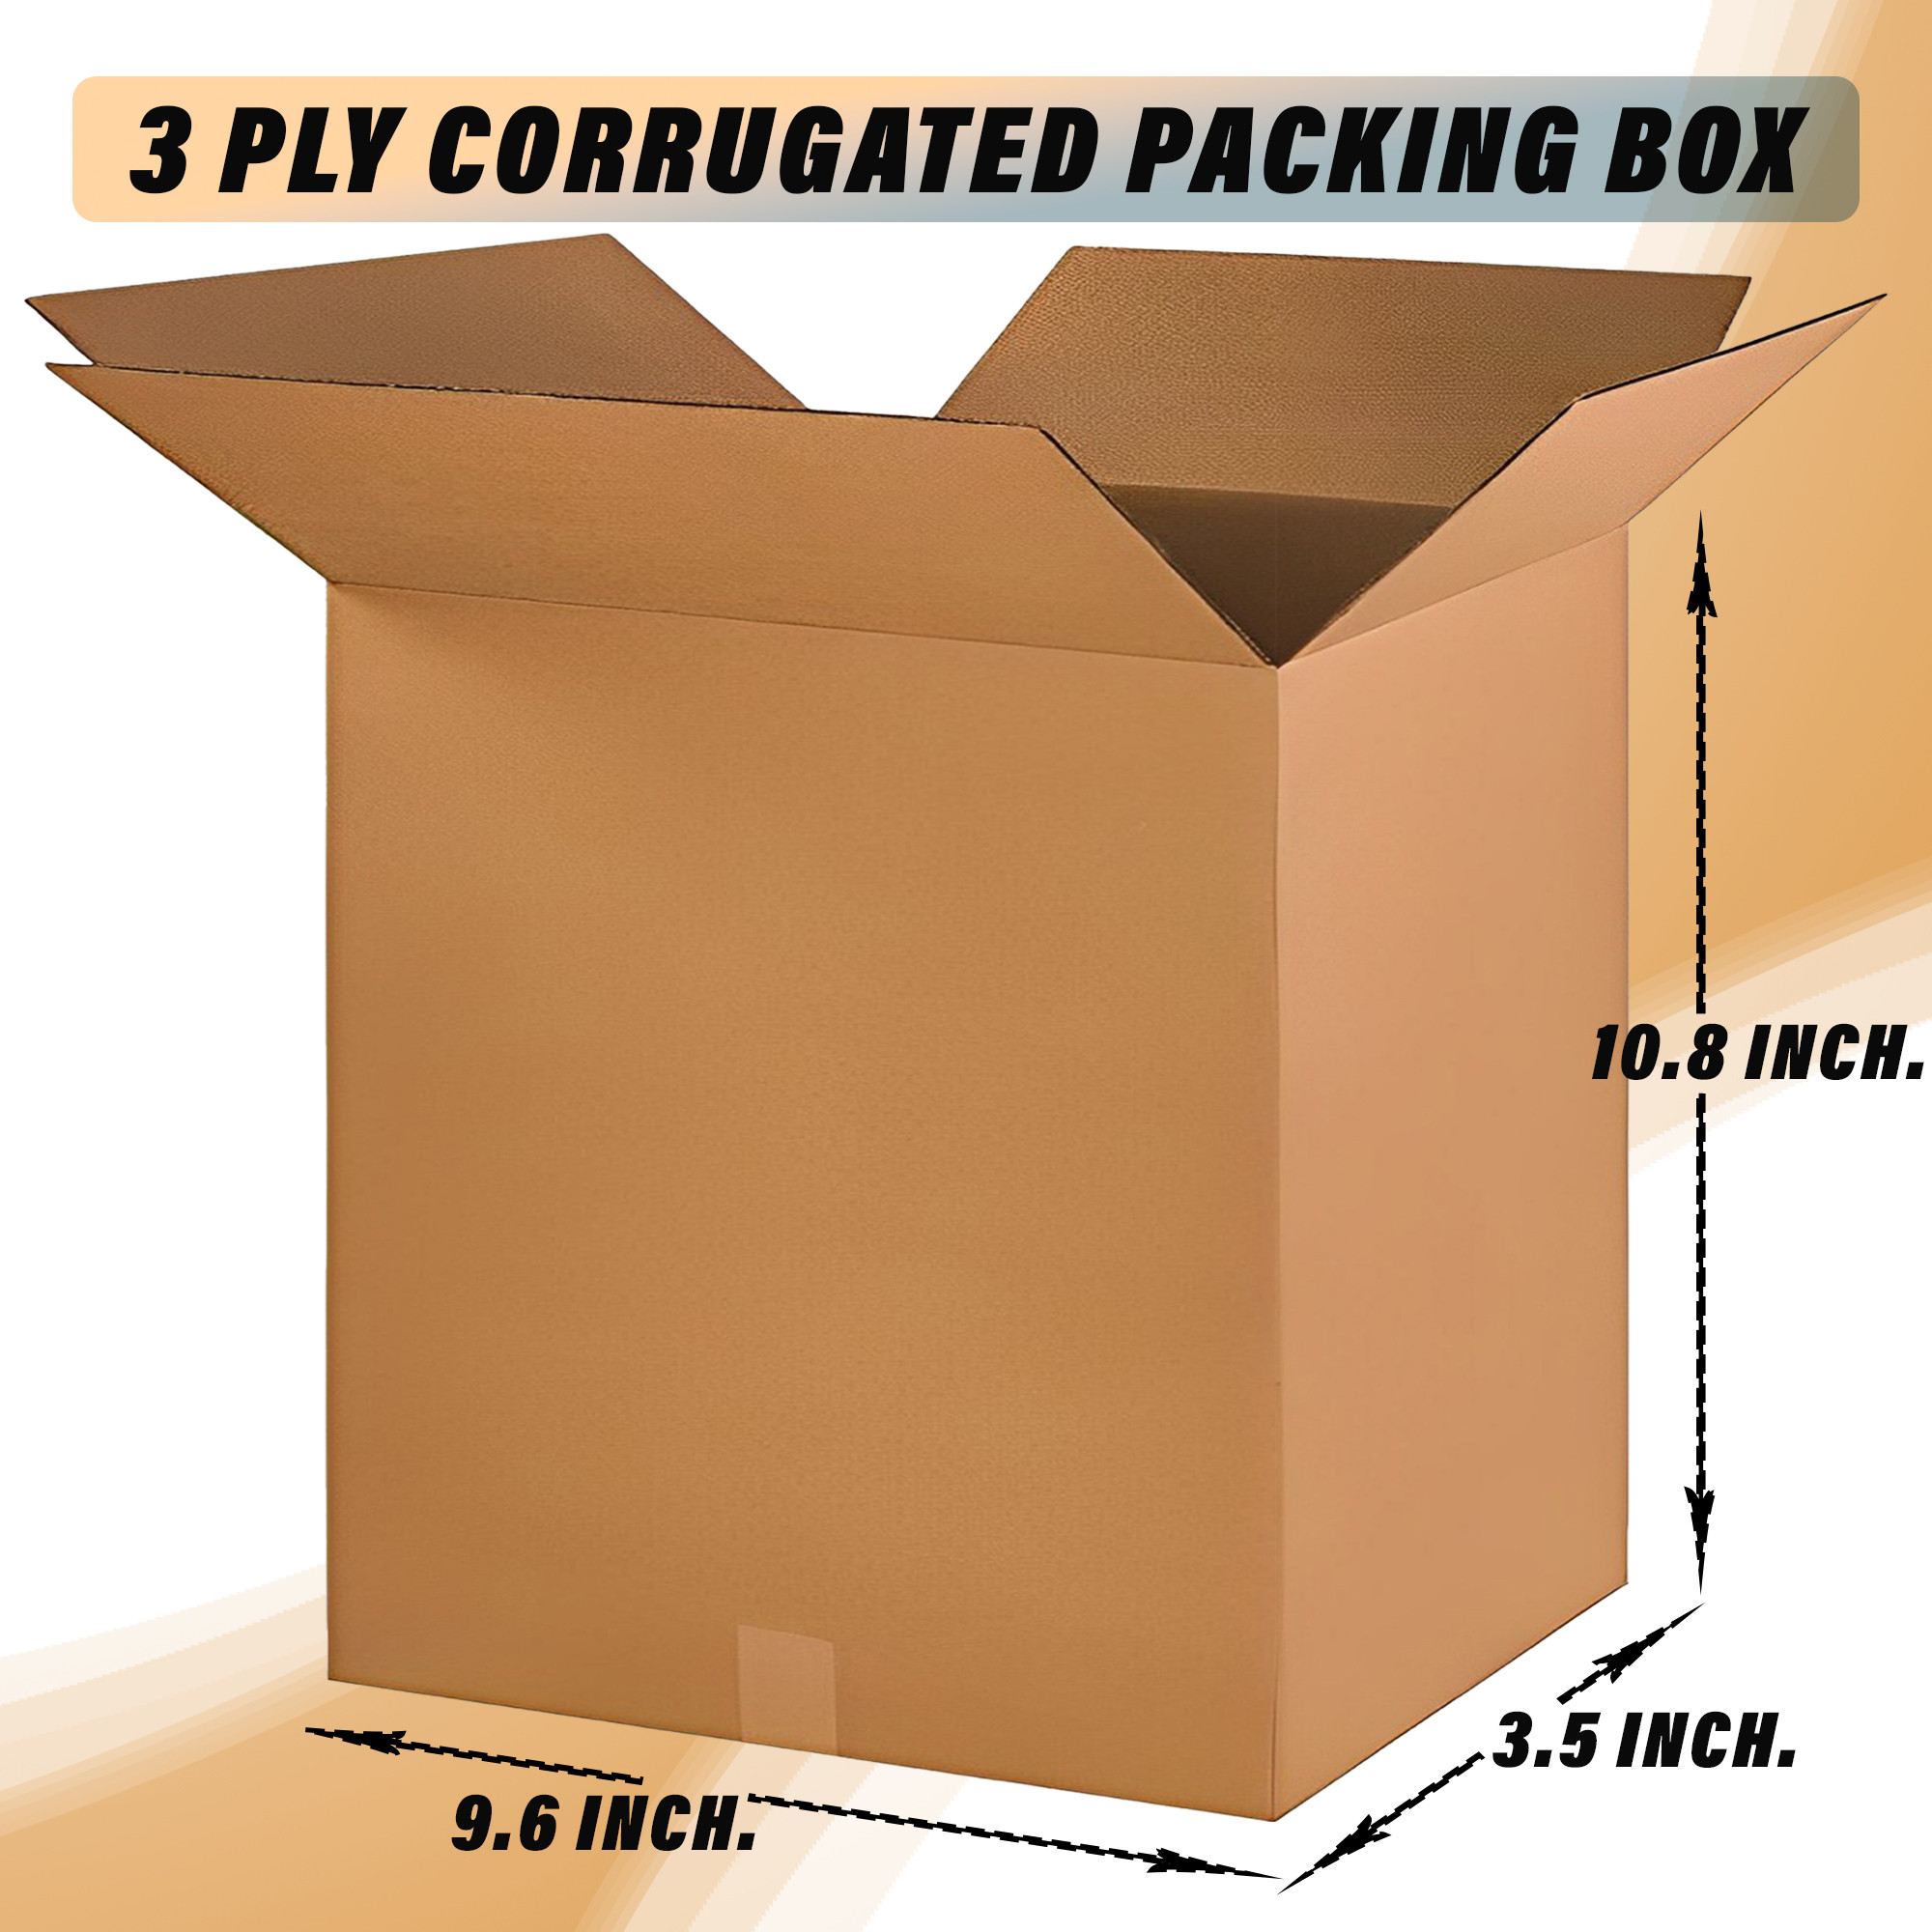 Kuber Industries Corrugated Box | 3 Ply Corrugated Packing Box | Corrugated for Shipping | Corrugated for Courier & Goods Transportation | L 9.6 x W 3.5 x H 10.8 Inch | Brown